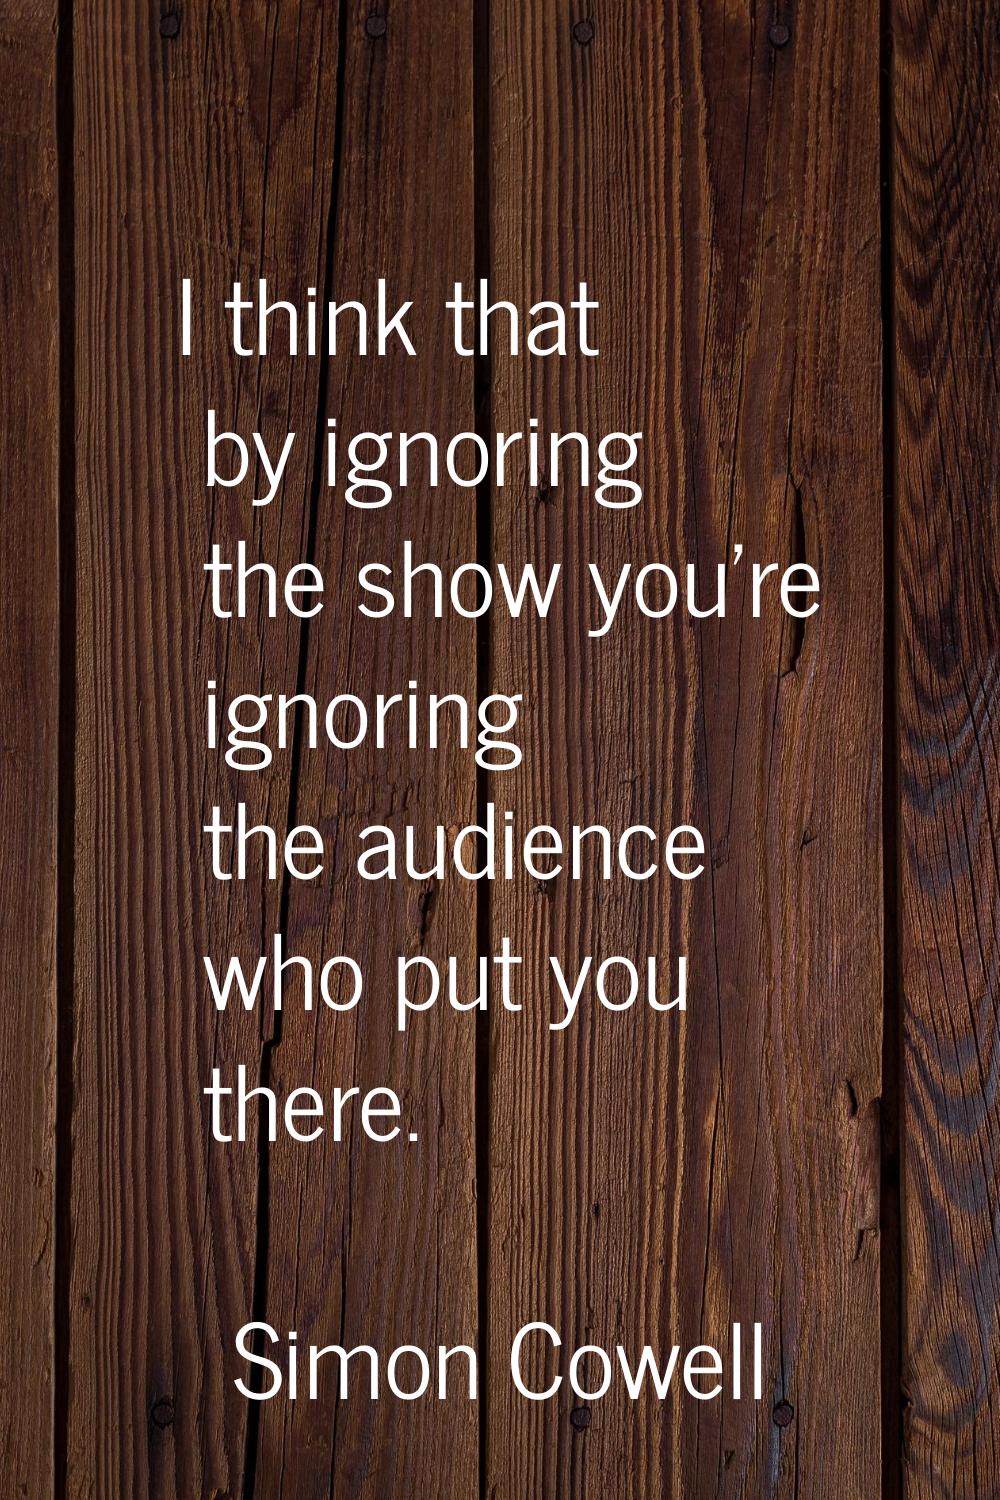 I think that by ignoring the show you're ignoring the audience who put you there.